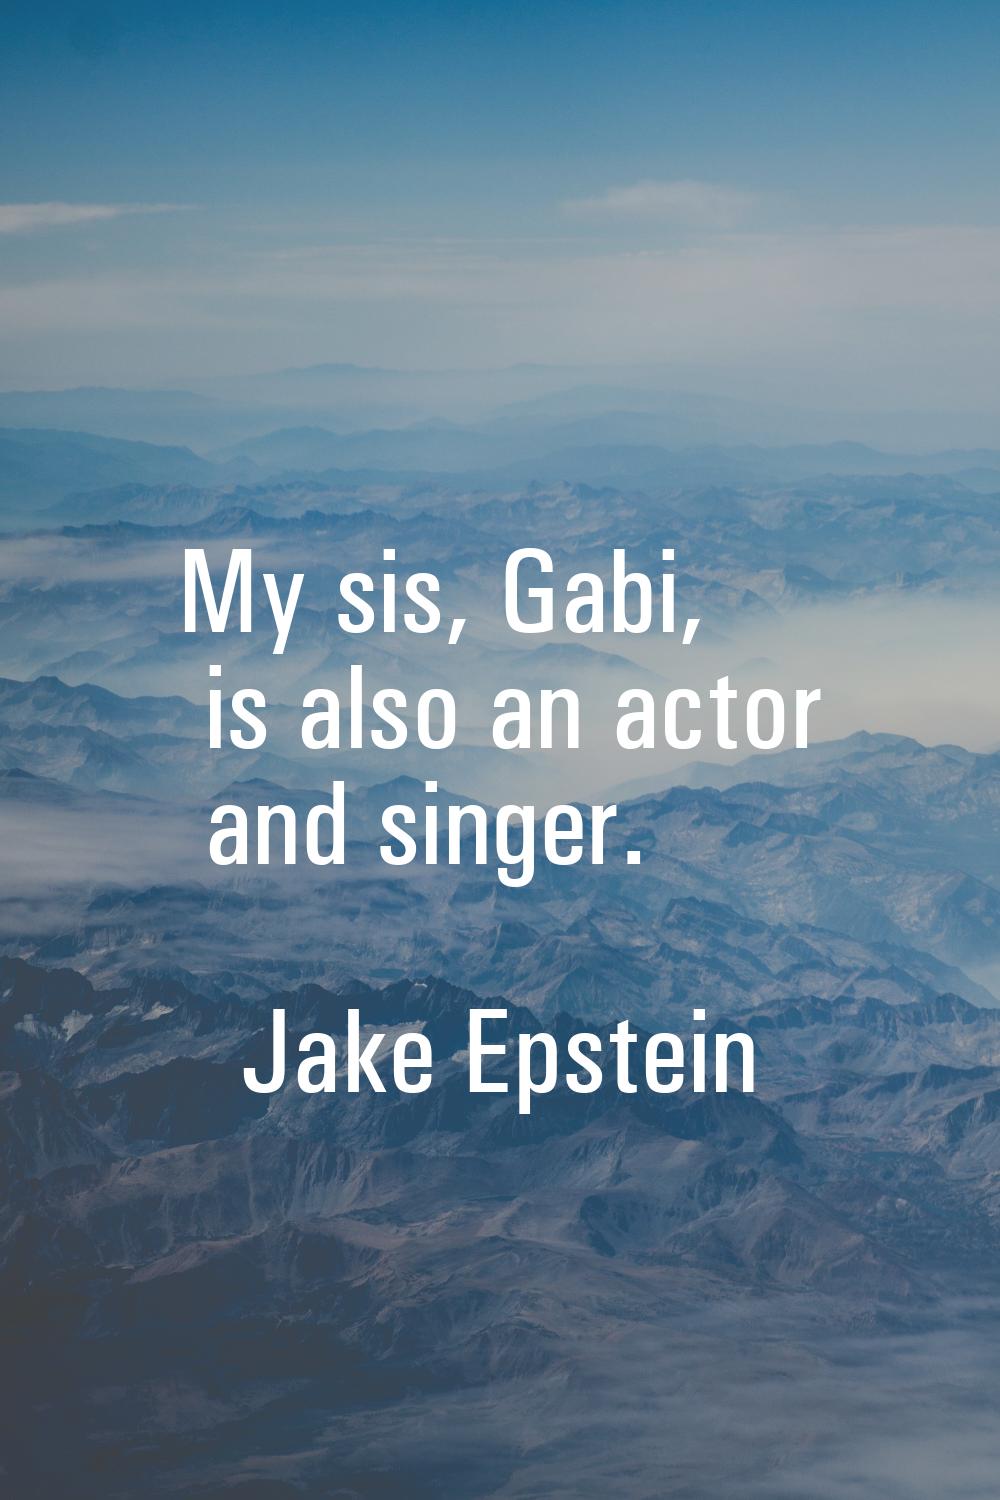 My sis, Gabi, is also an actor and singer.